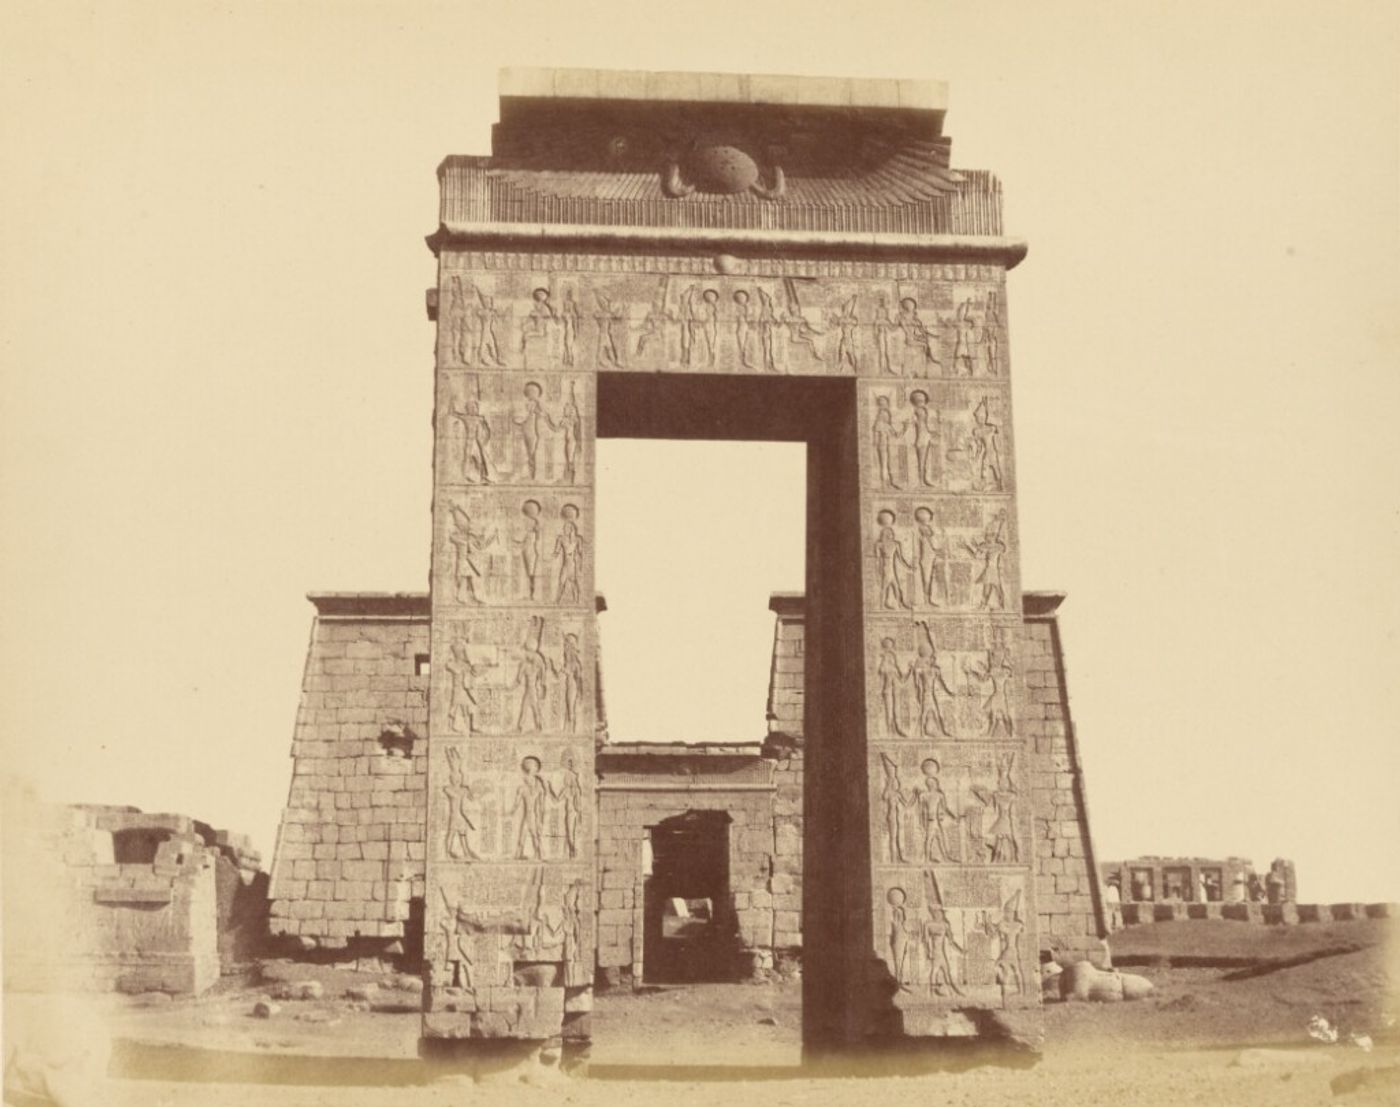 Portal of the Temple of Khonsu, Karnak1859 - 1862. Digital image courtesy of the Getty's Open Content Program.